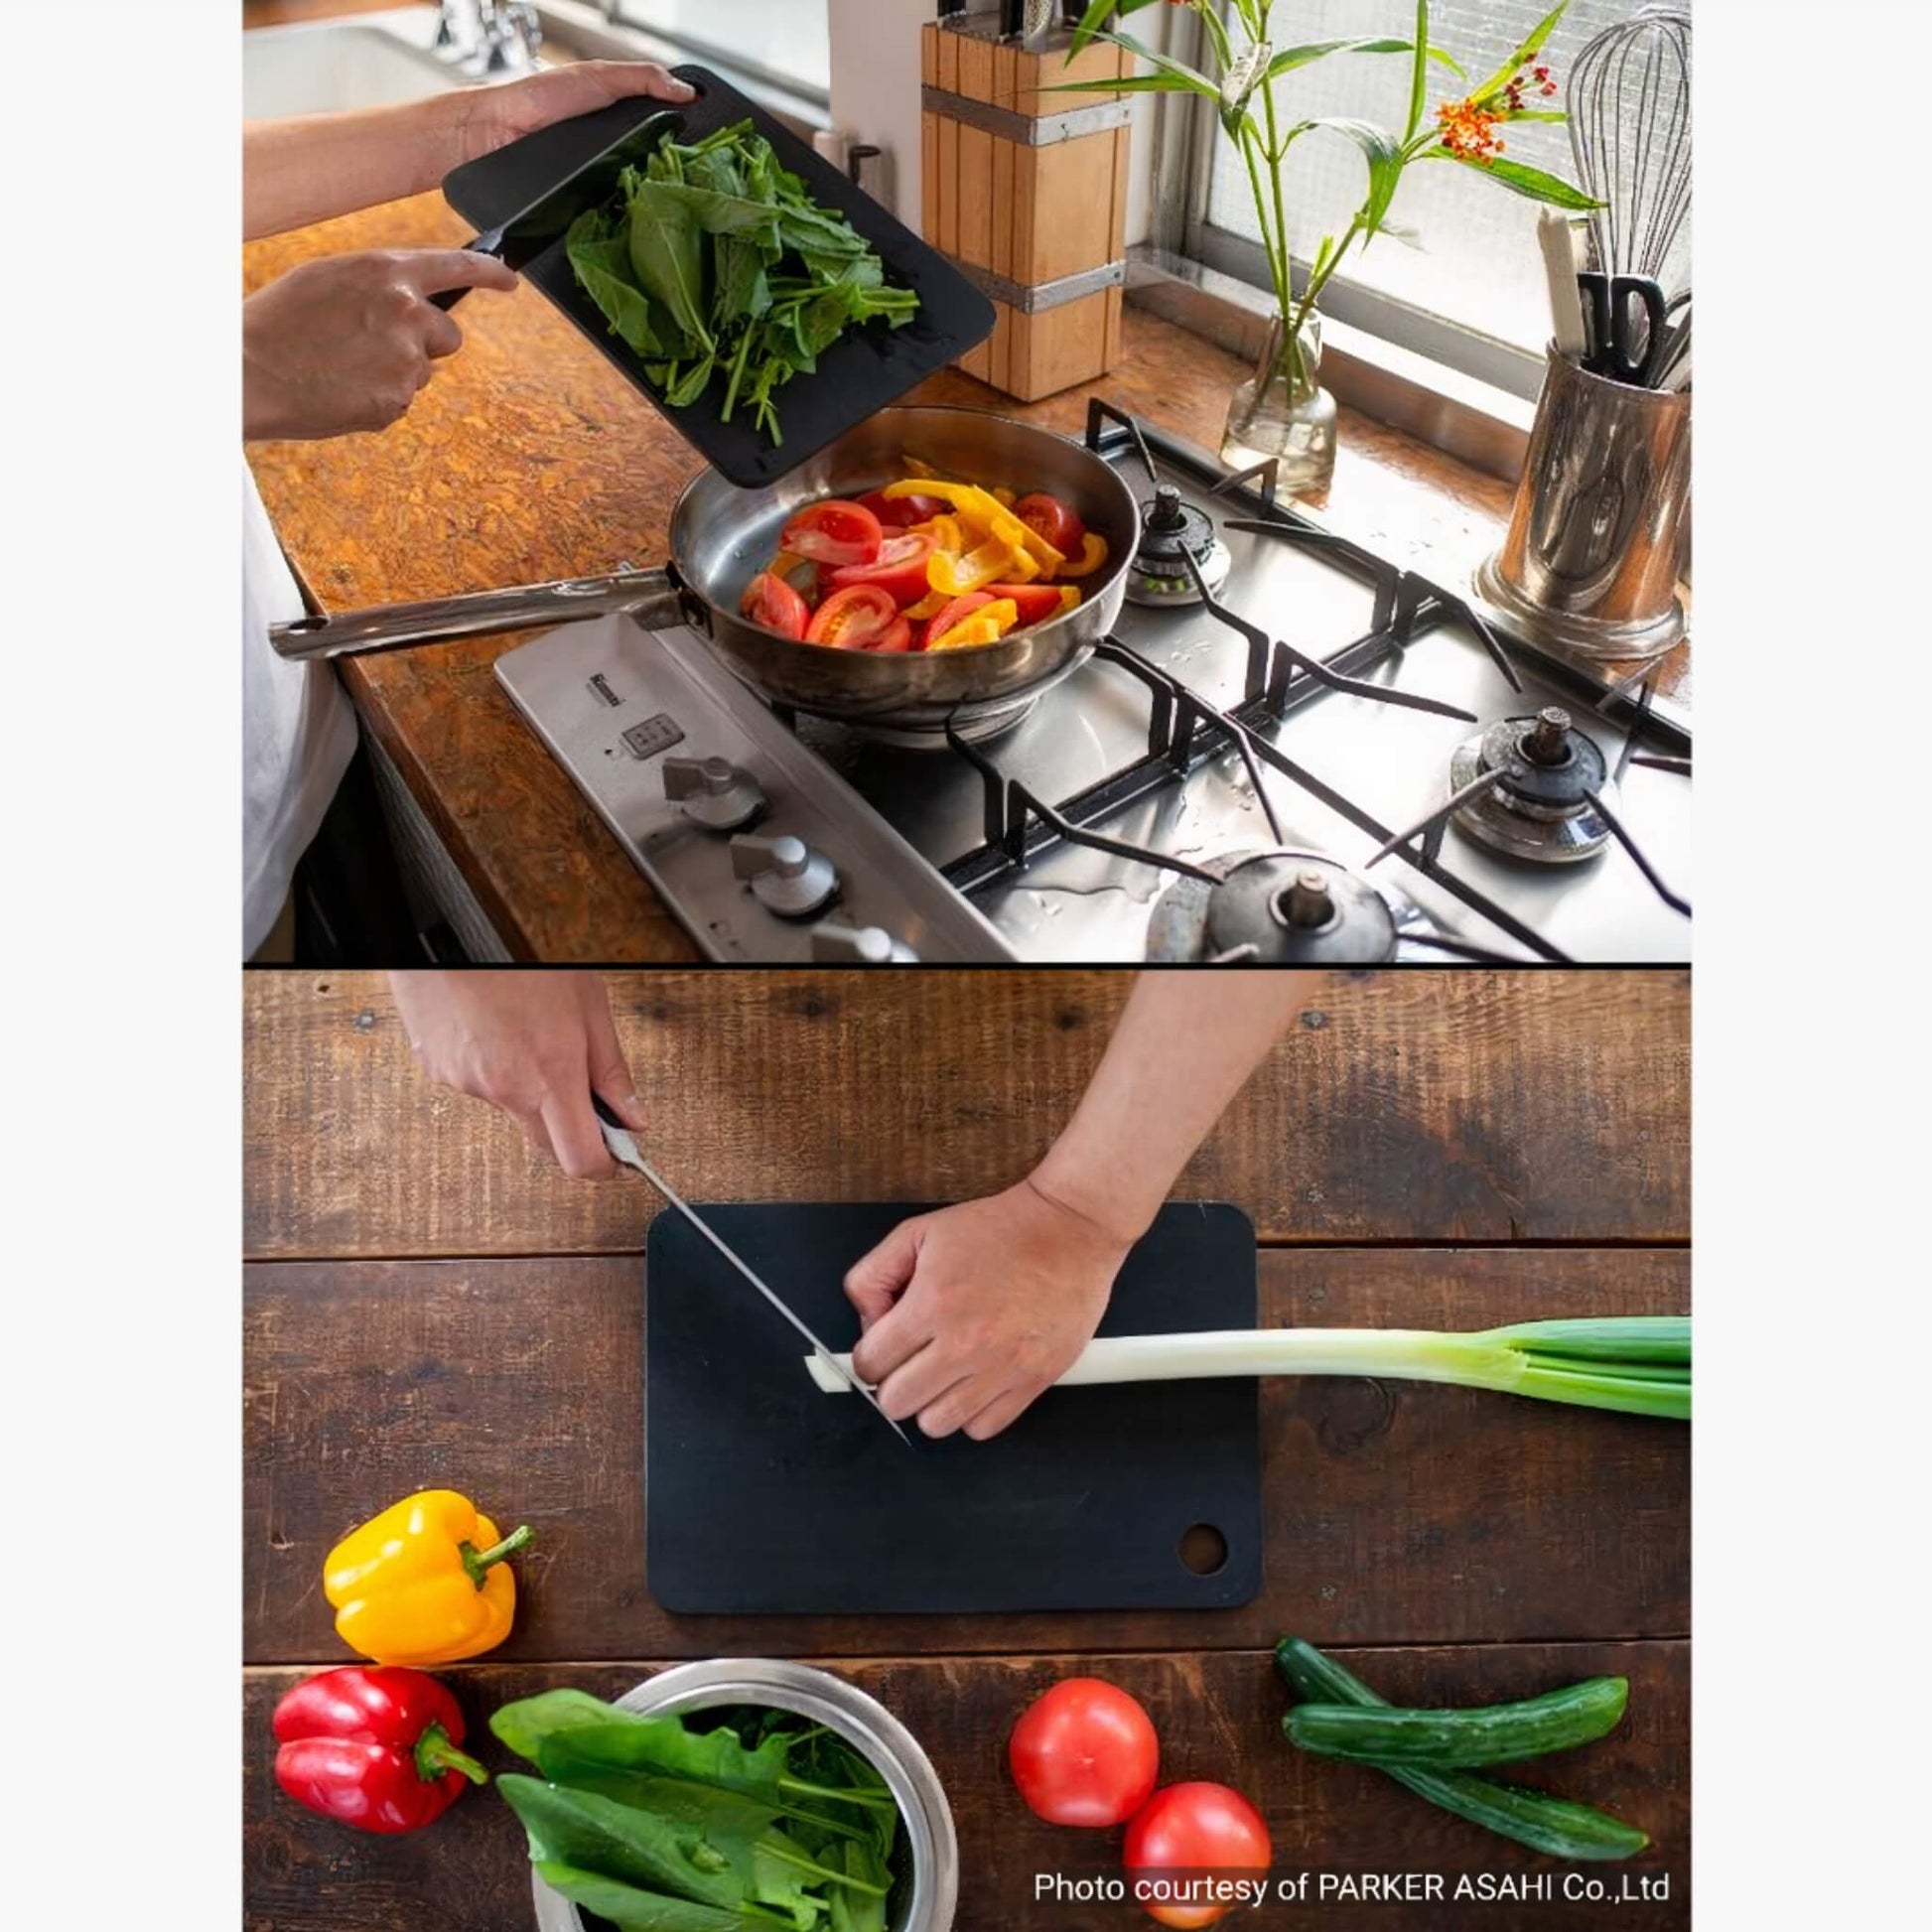 Japanese Black Rubber Large Punching Cutting Board 30mm X 200mm X